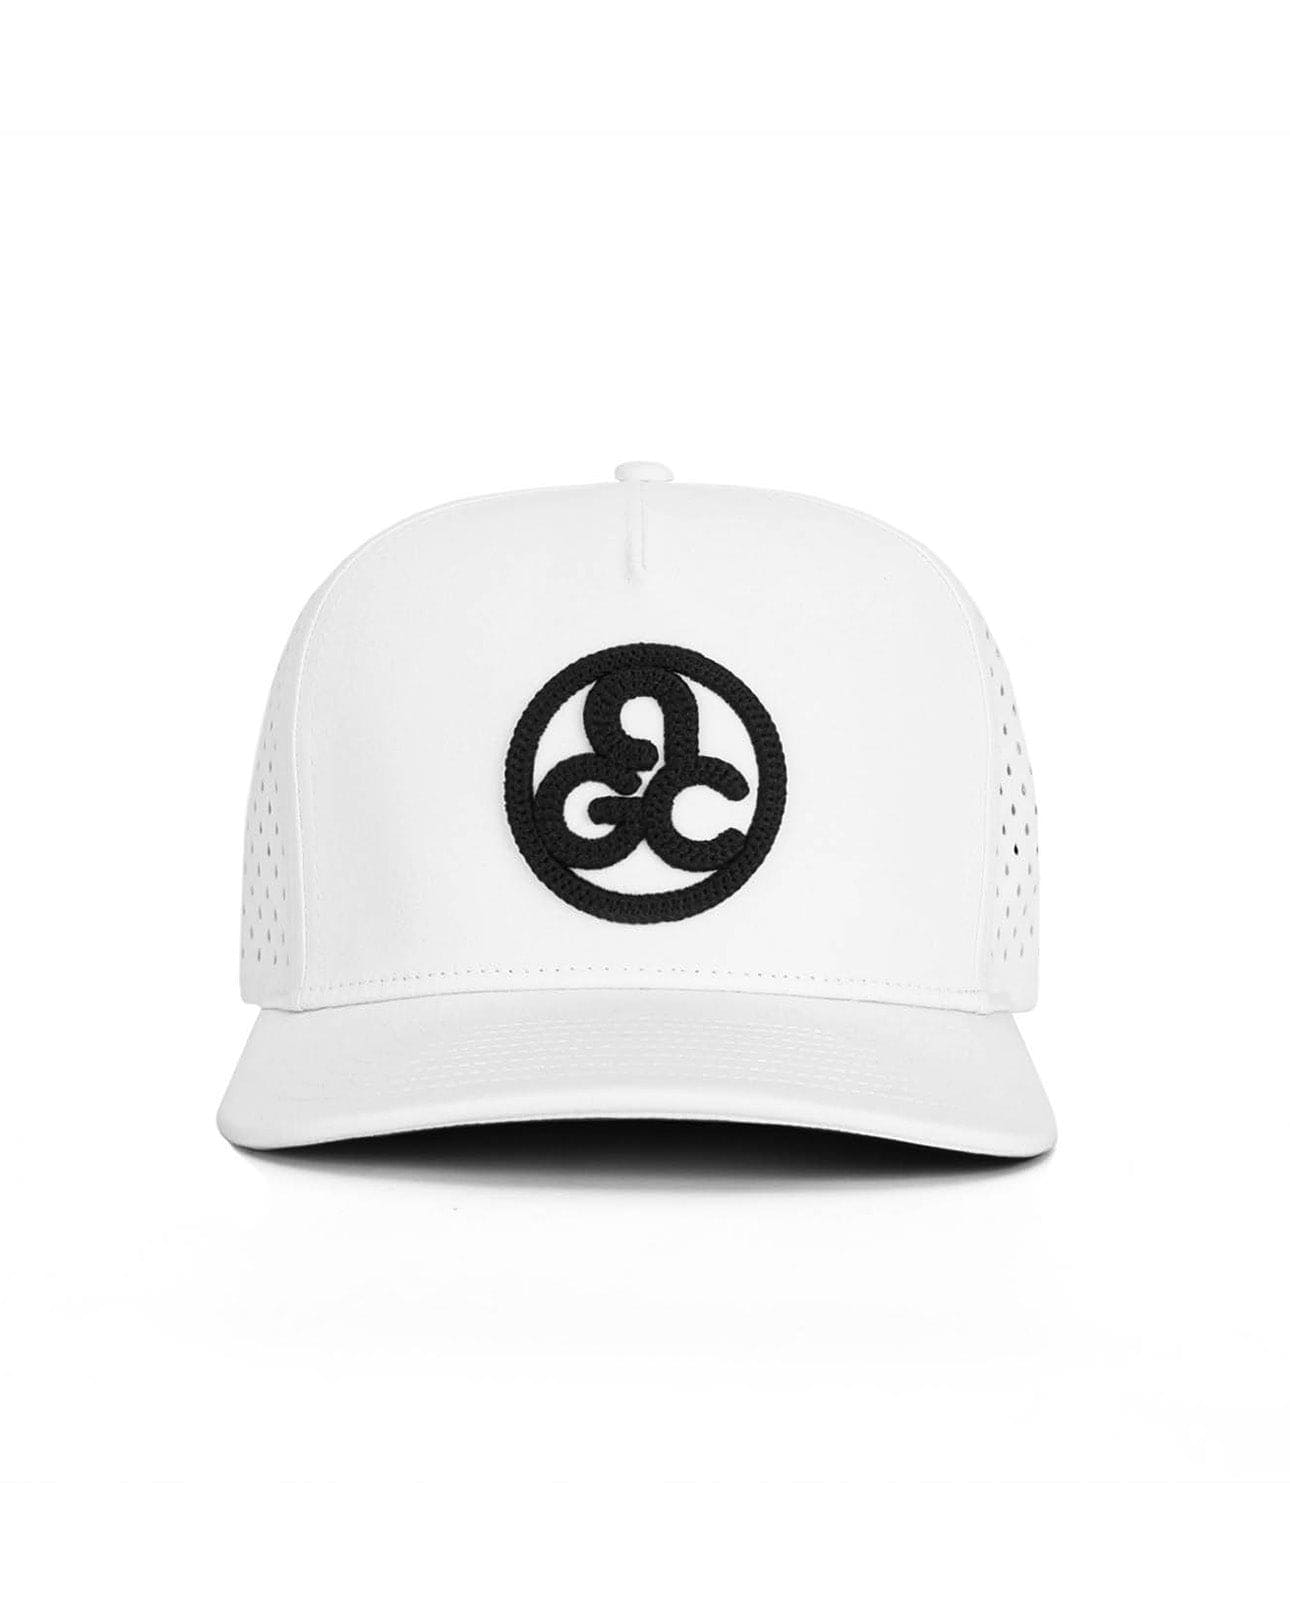 THE PACIFIC HAT - WHITE